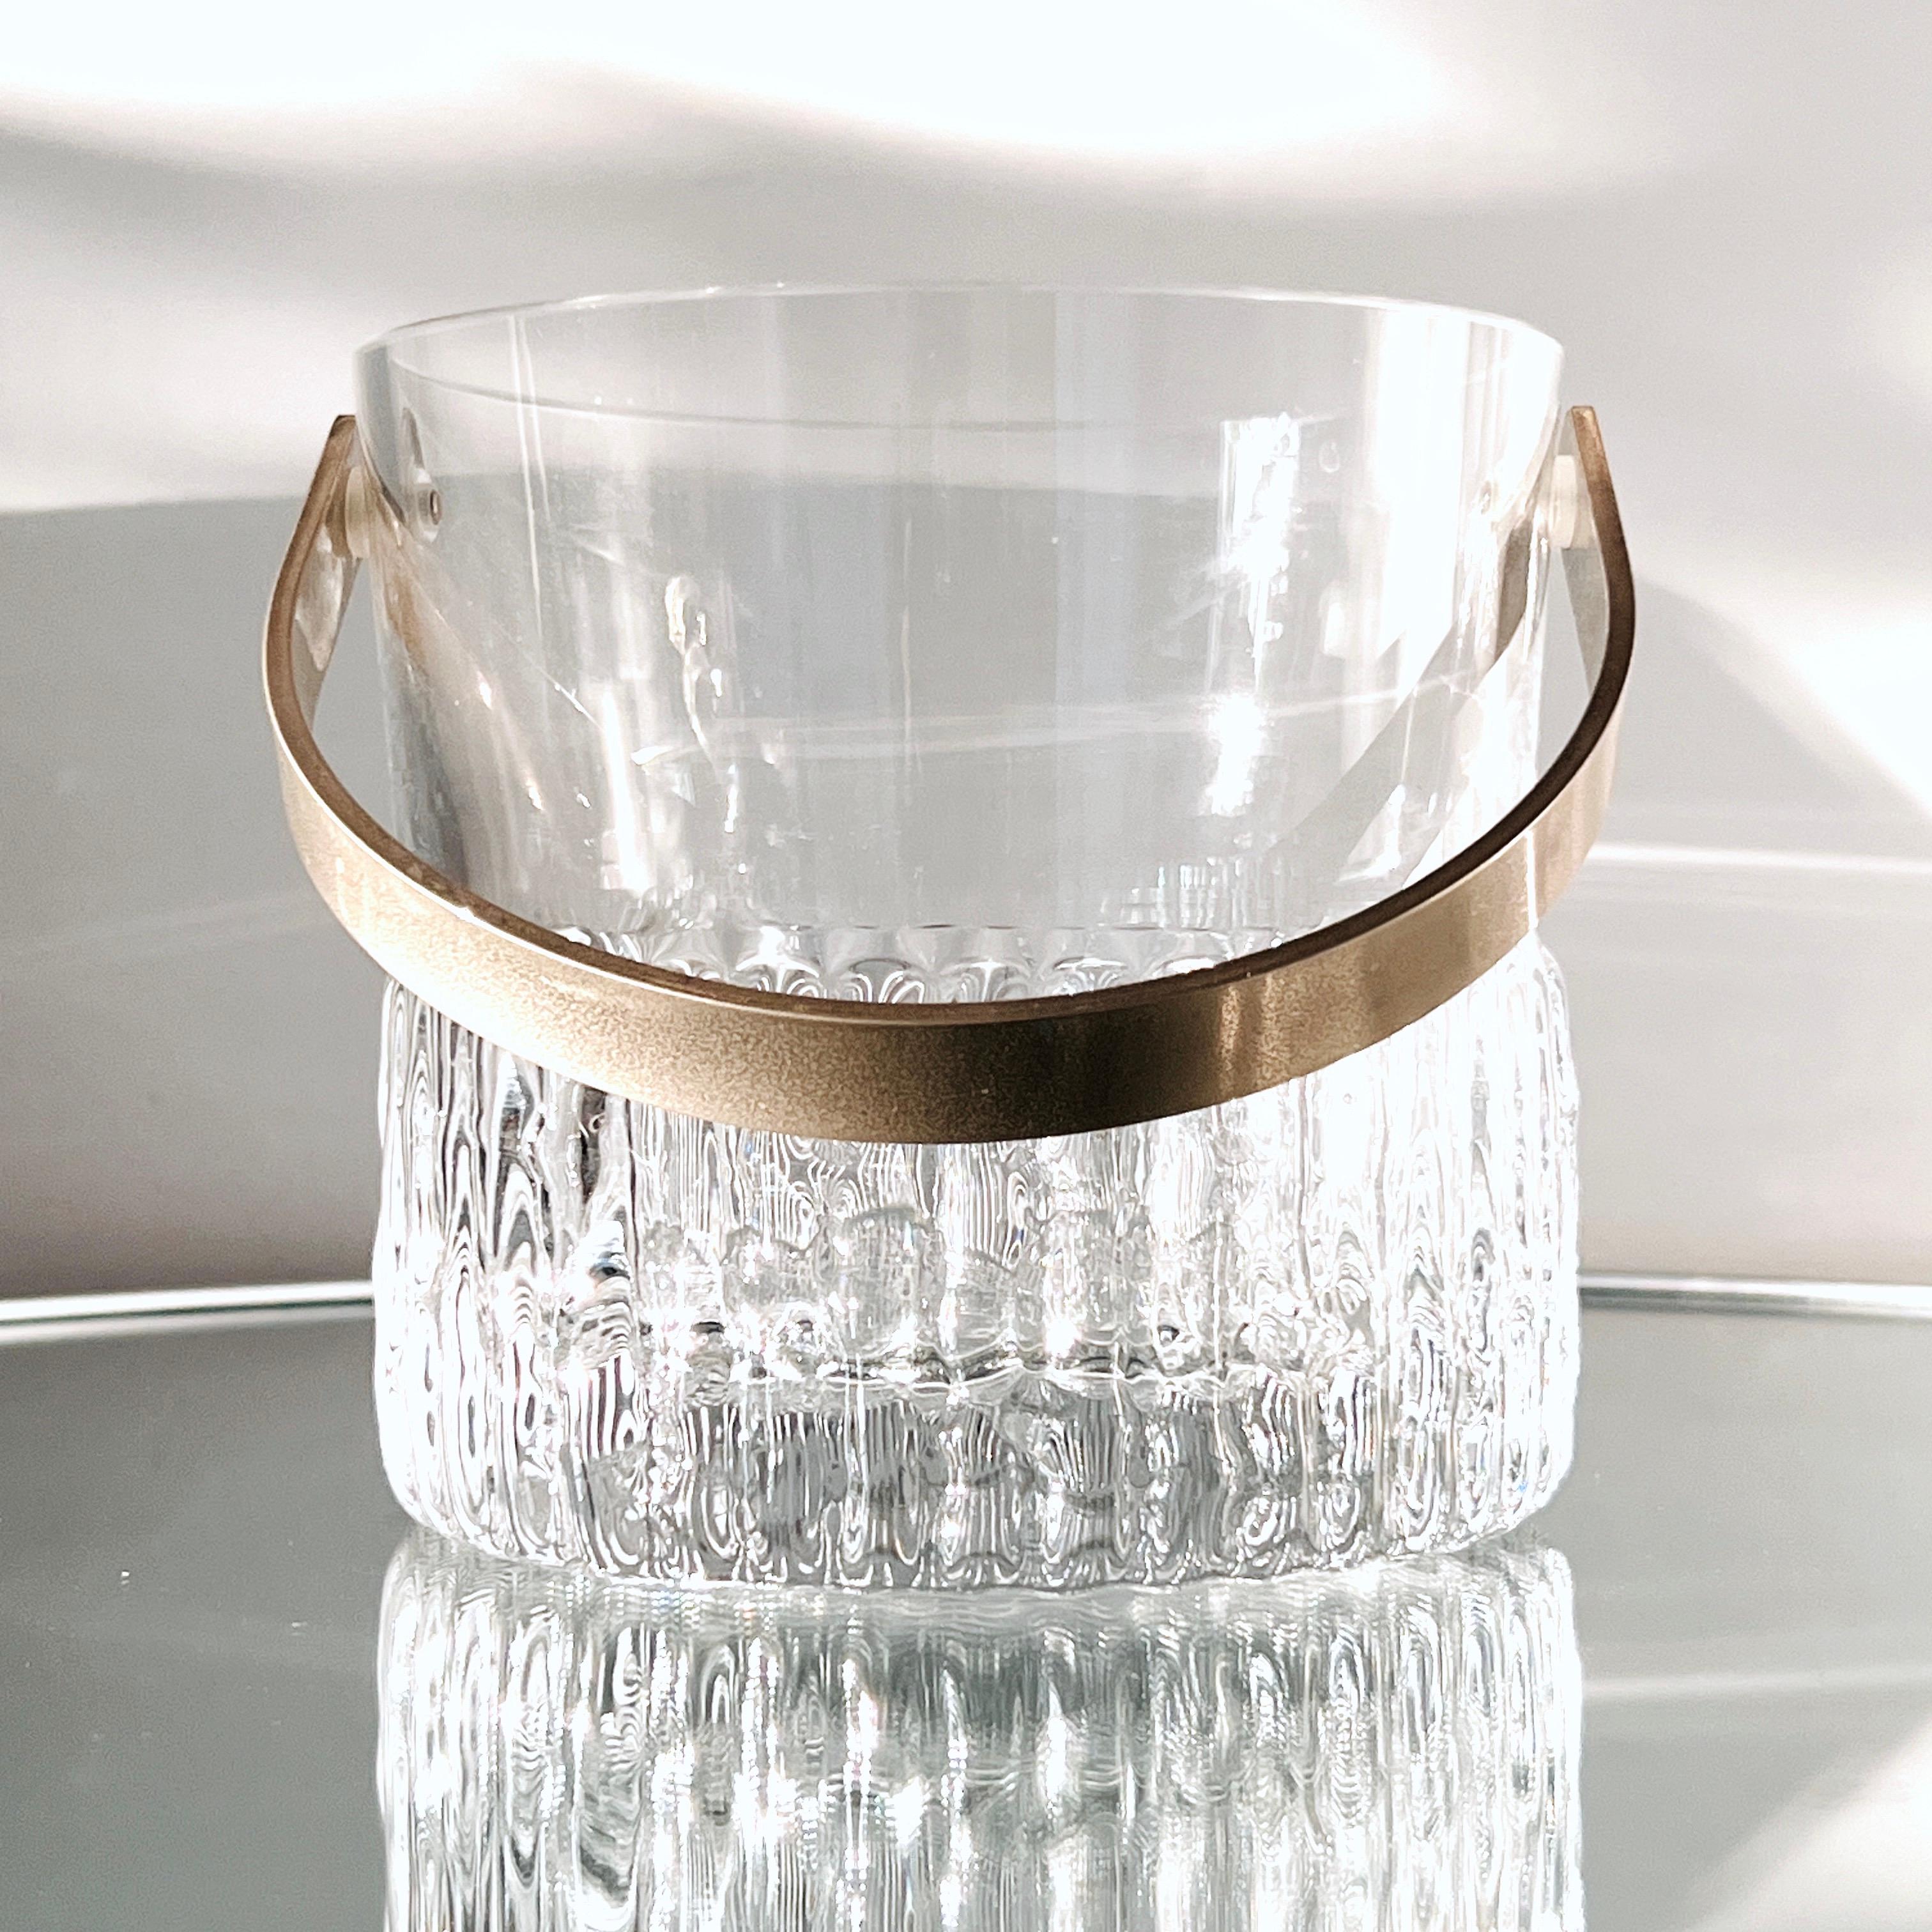 French Mid-Century Modern Crystal Ice Bucket with Textured Glass, France, c. 1970s For Sale